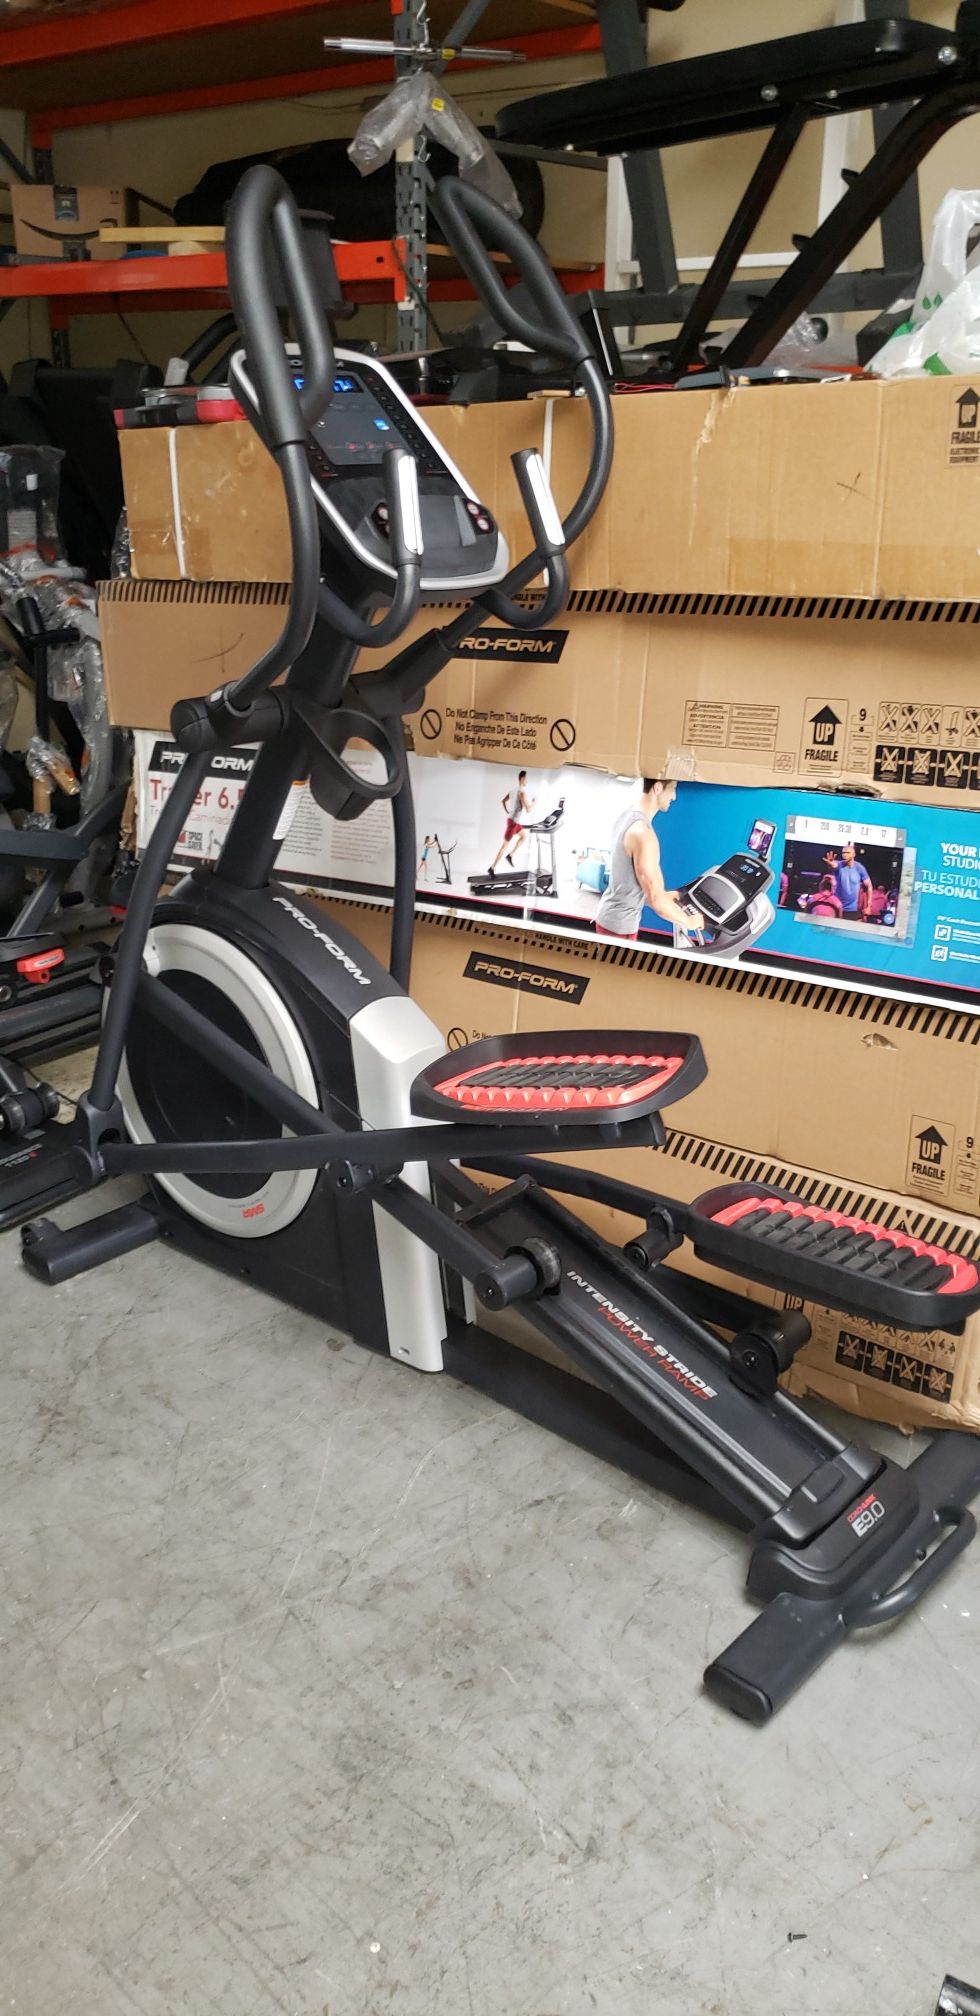 Pro-form Coachlink E9.0 elliptical 350lbs weight Capacity great cardio machine for your home gym